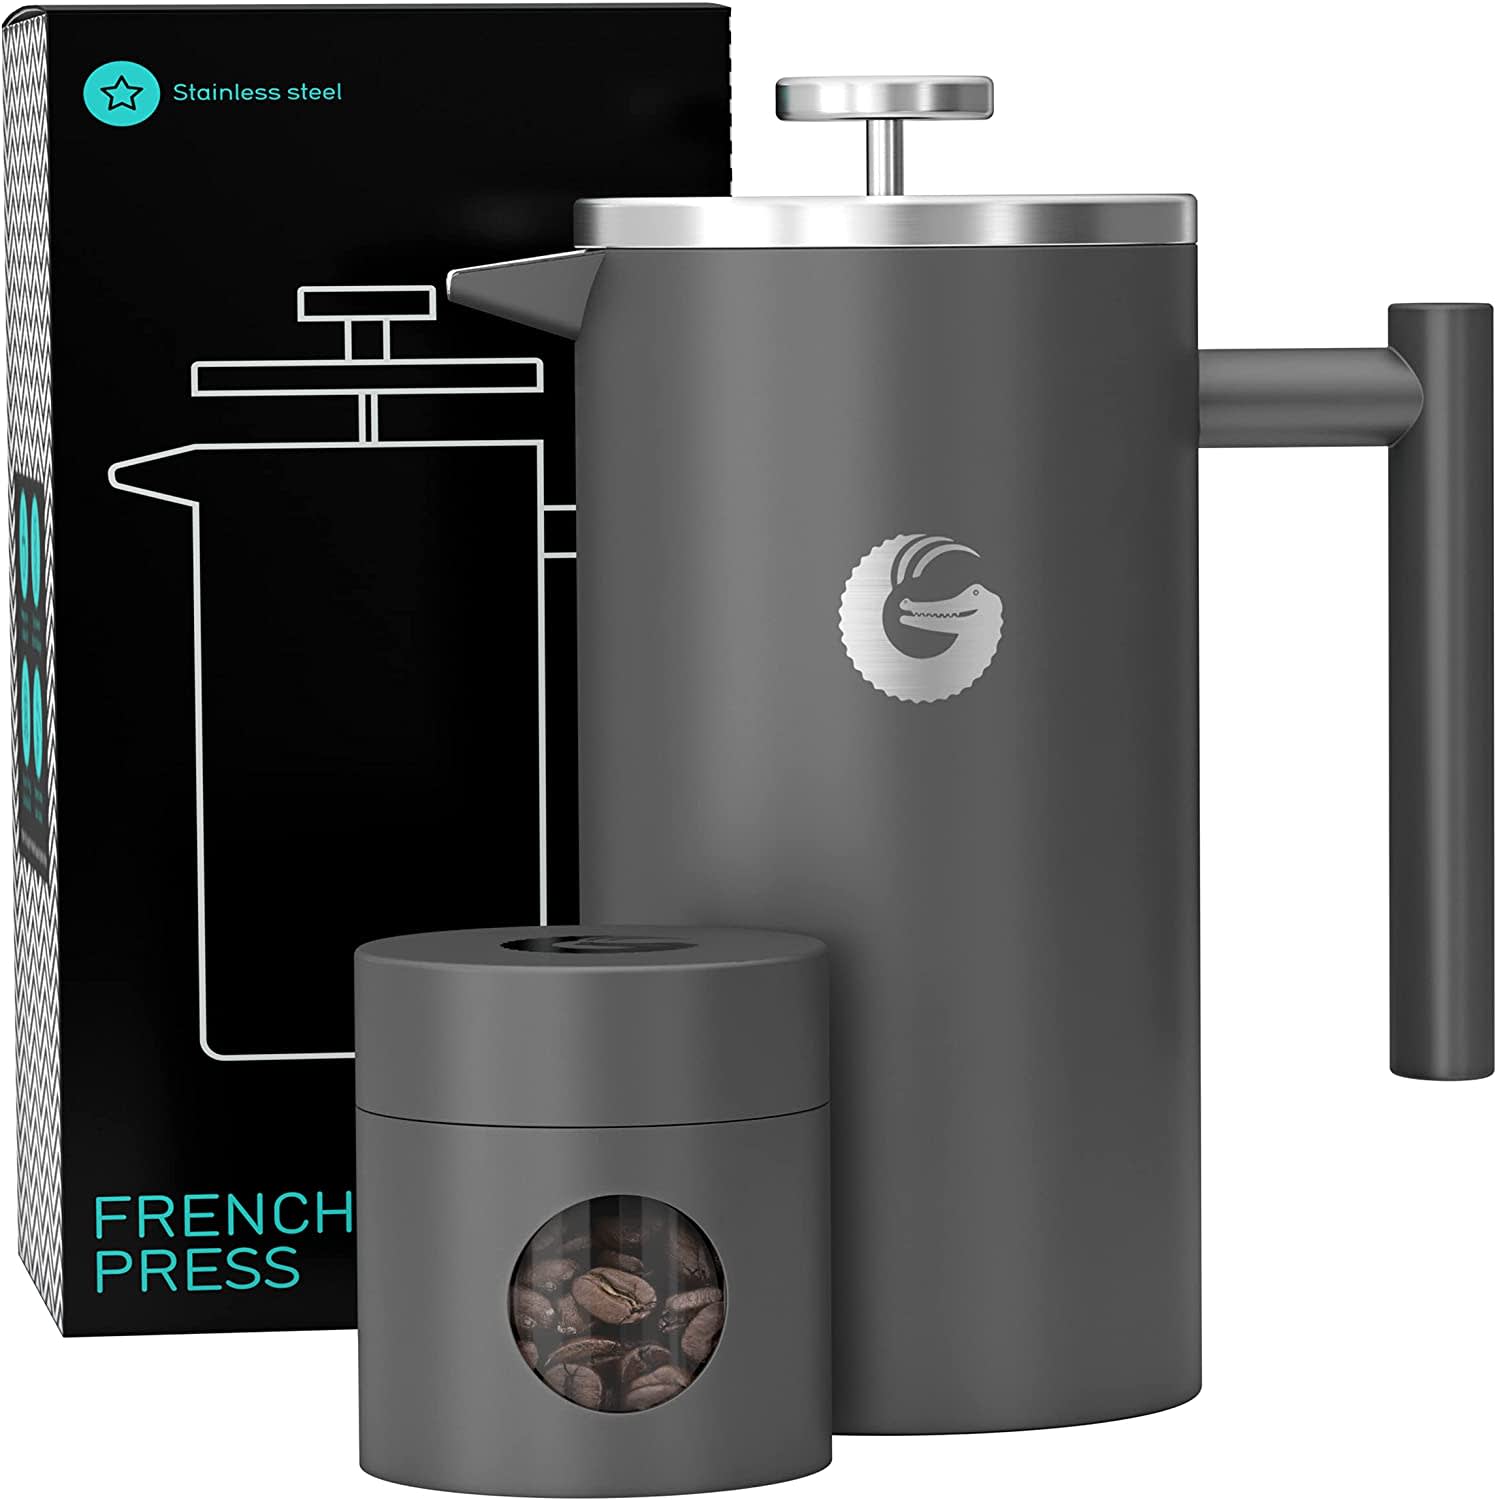 Best French Press Coffee Makers for 2021: OXO, Bodum, Fellow